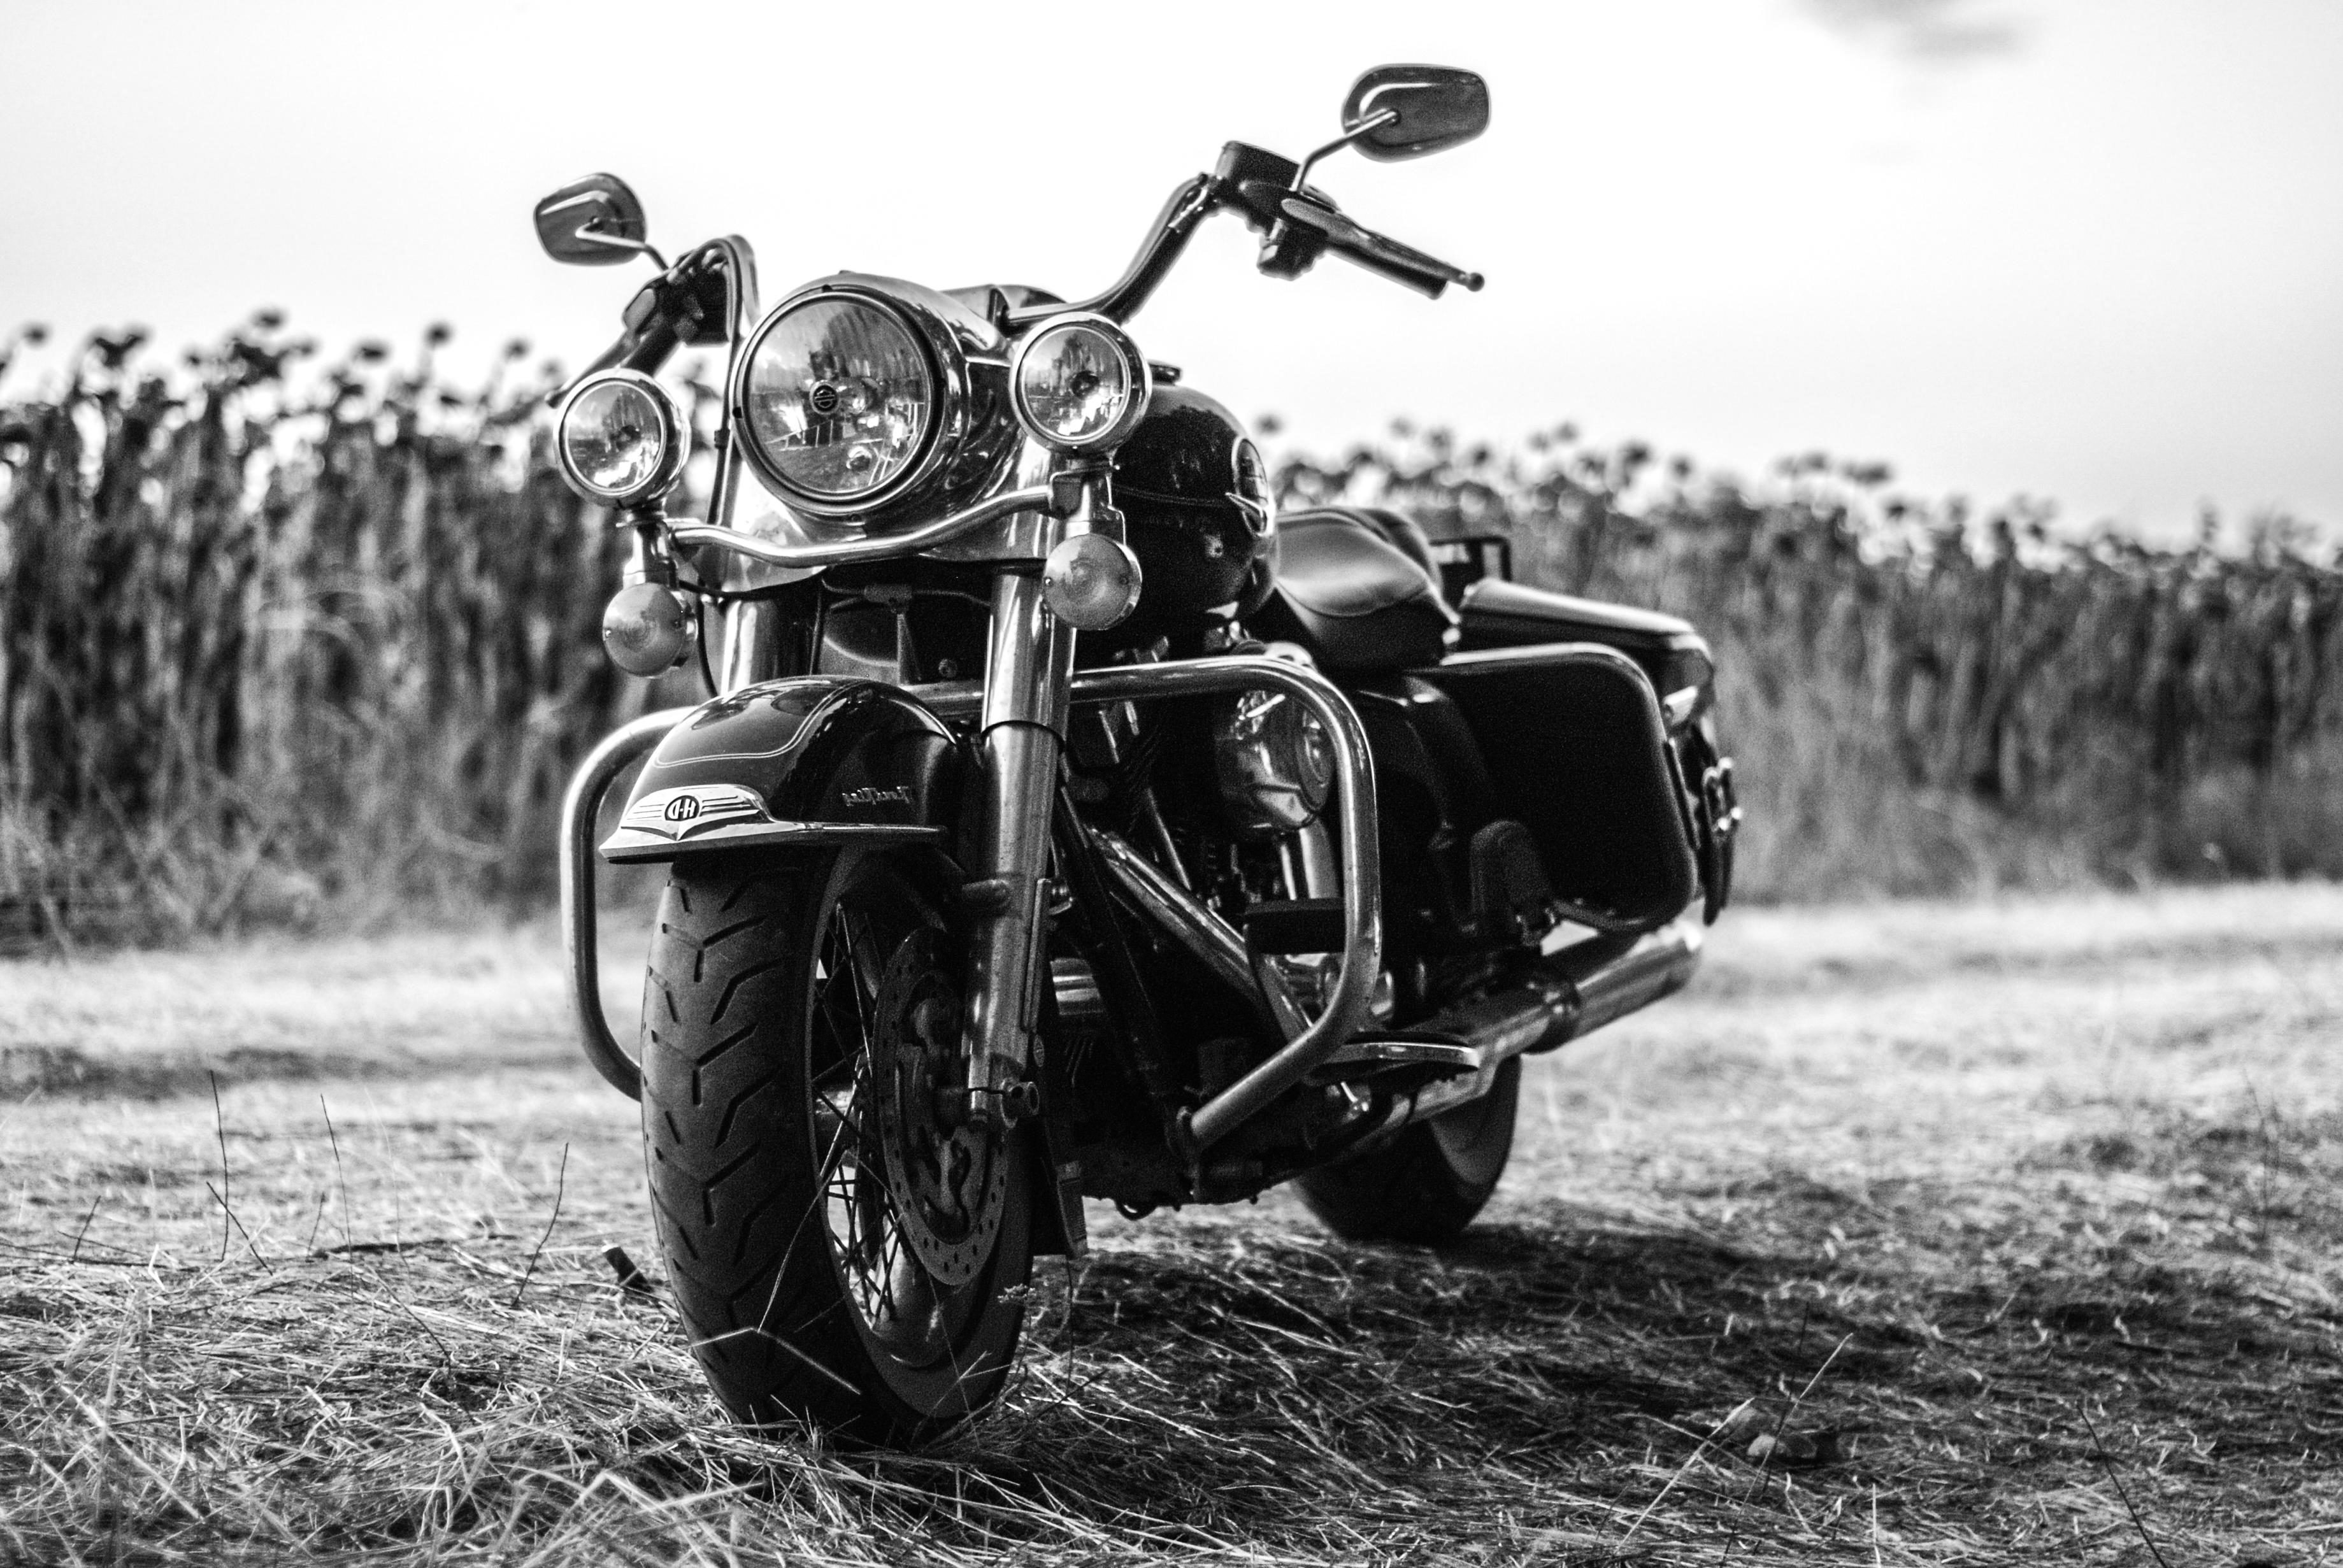 Safety Features to Look for in a Luxury Motorcycle for Daily Commuting